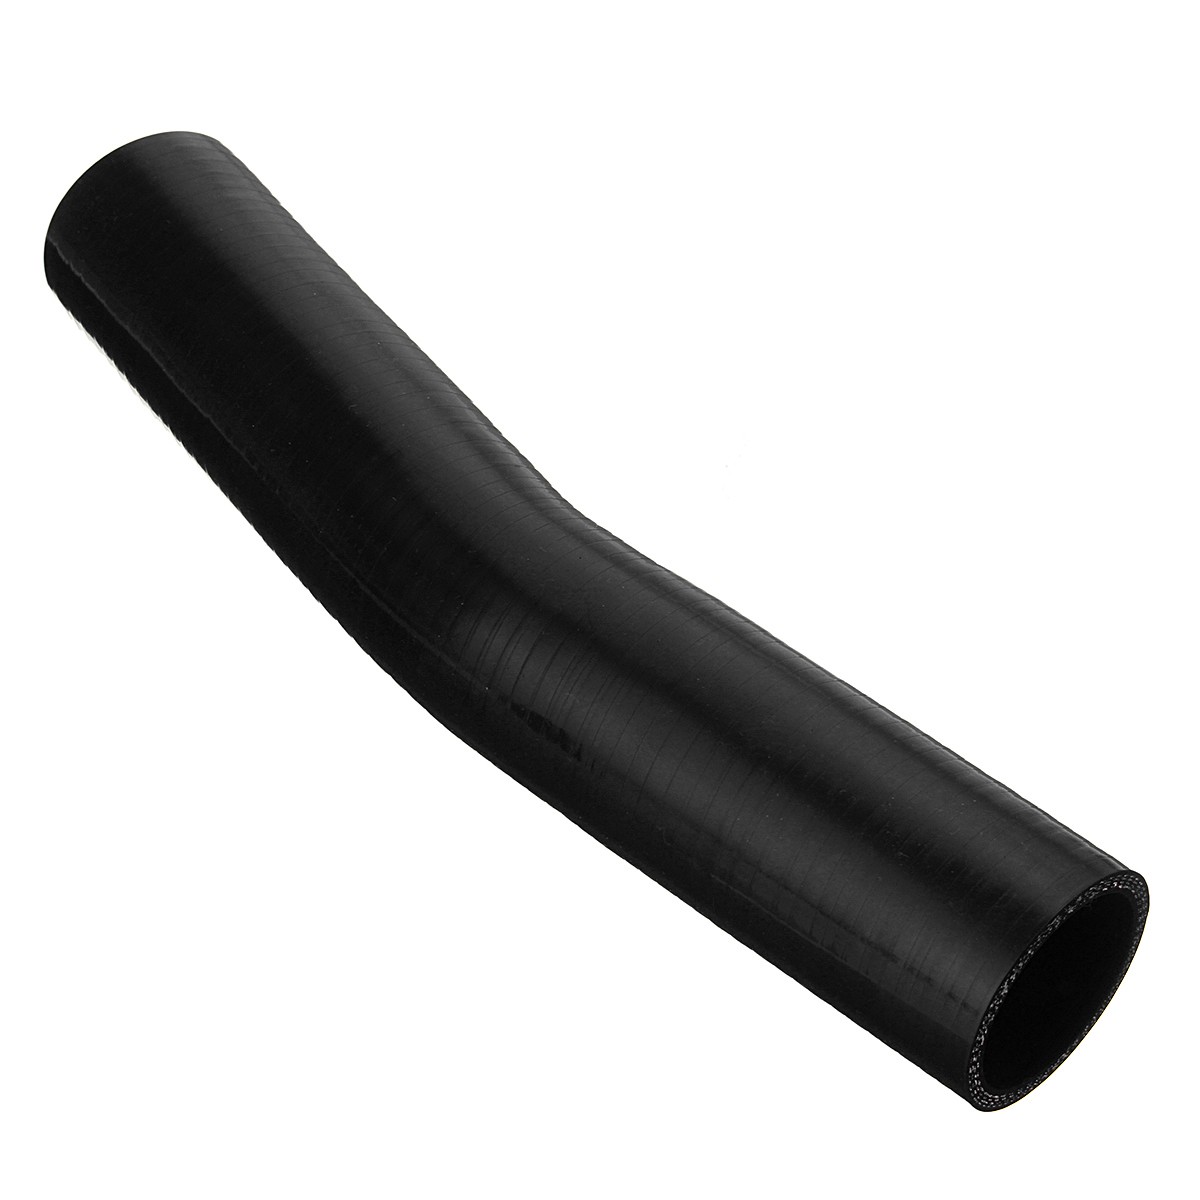 150mm-Black-Silicone-Hose-Rubber-15-Degree-Elbow-Bend-Hose-Air-Water-Coolant-Joiner-Pipe-Tube-1591449-4